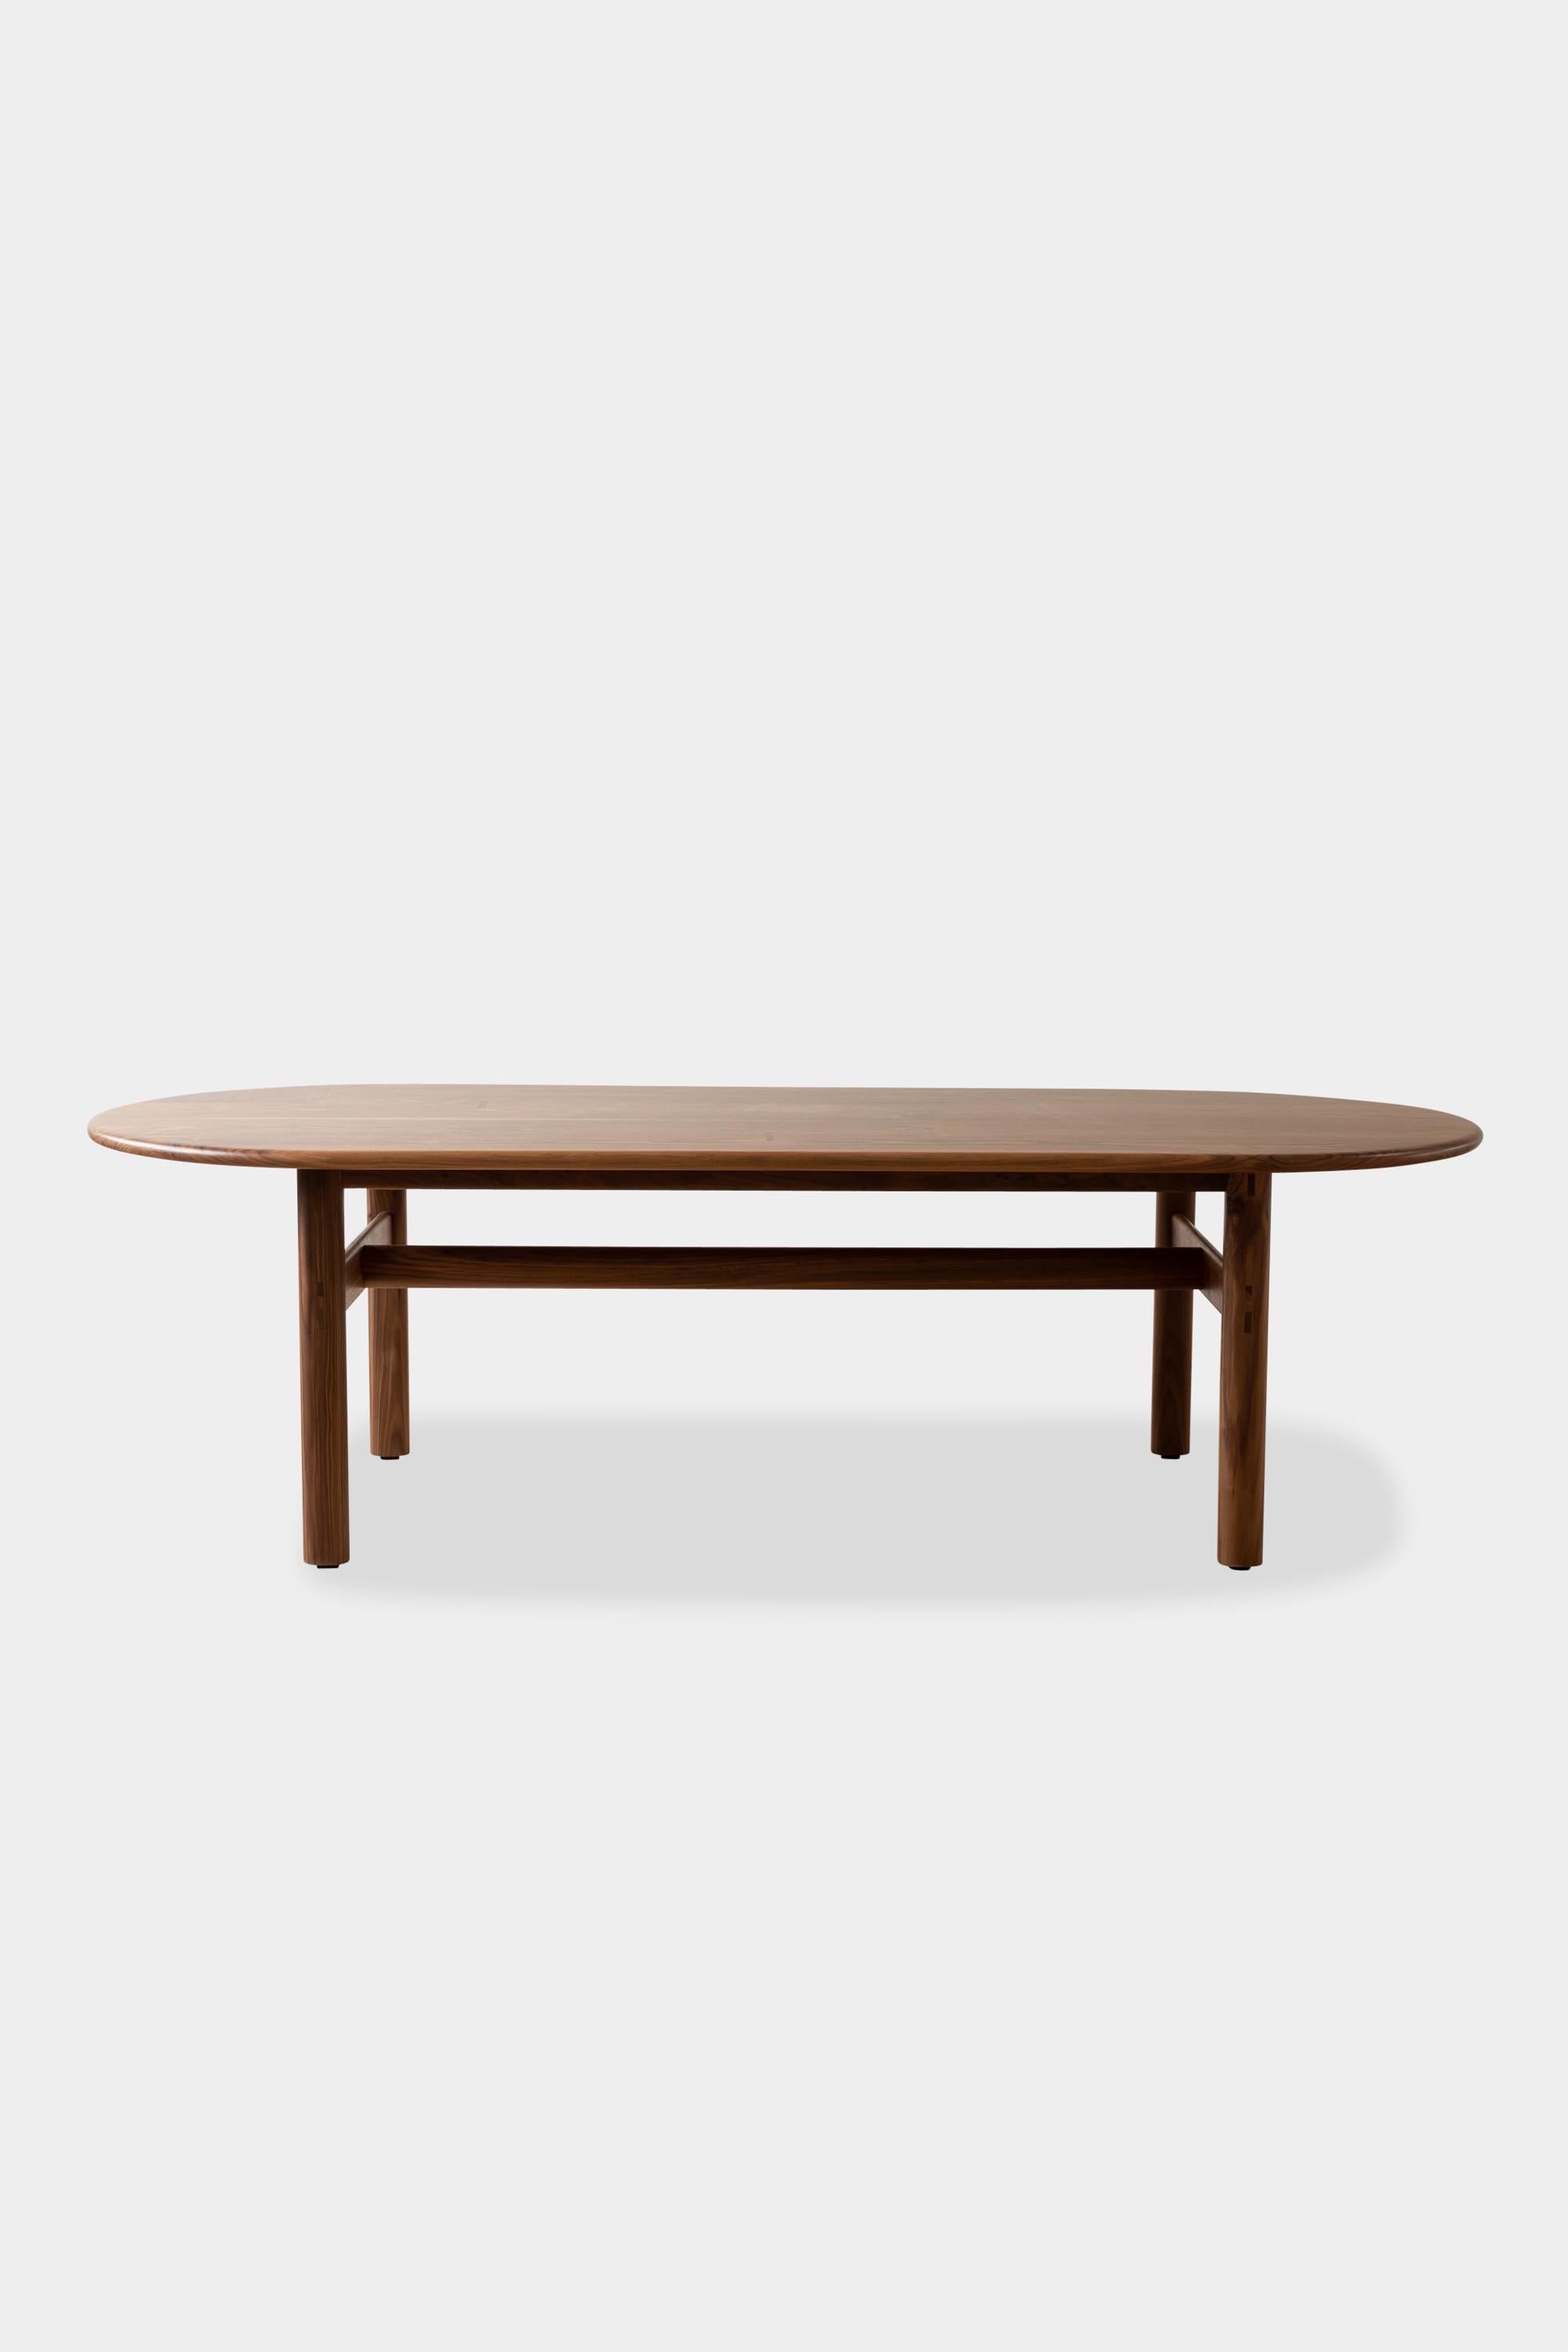 pill shaped dining table